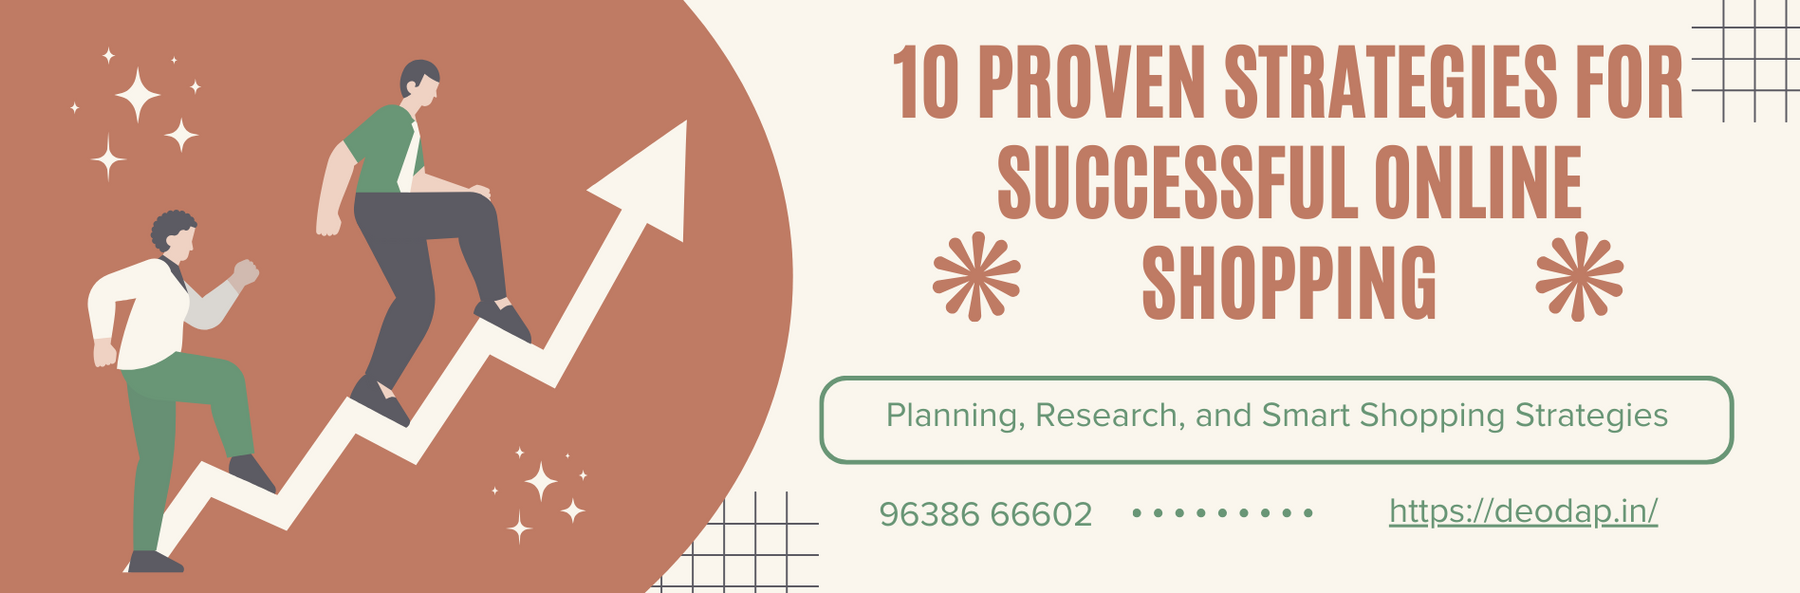 10 Proven Strategies For Successful Online Shopping